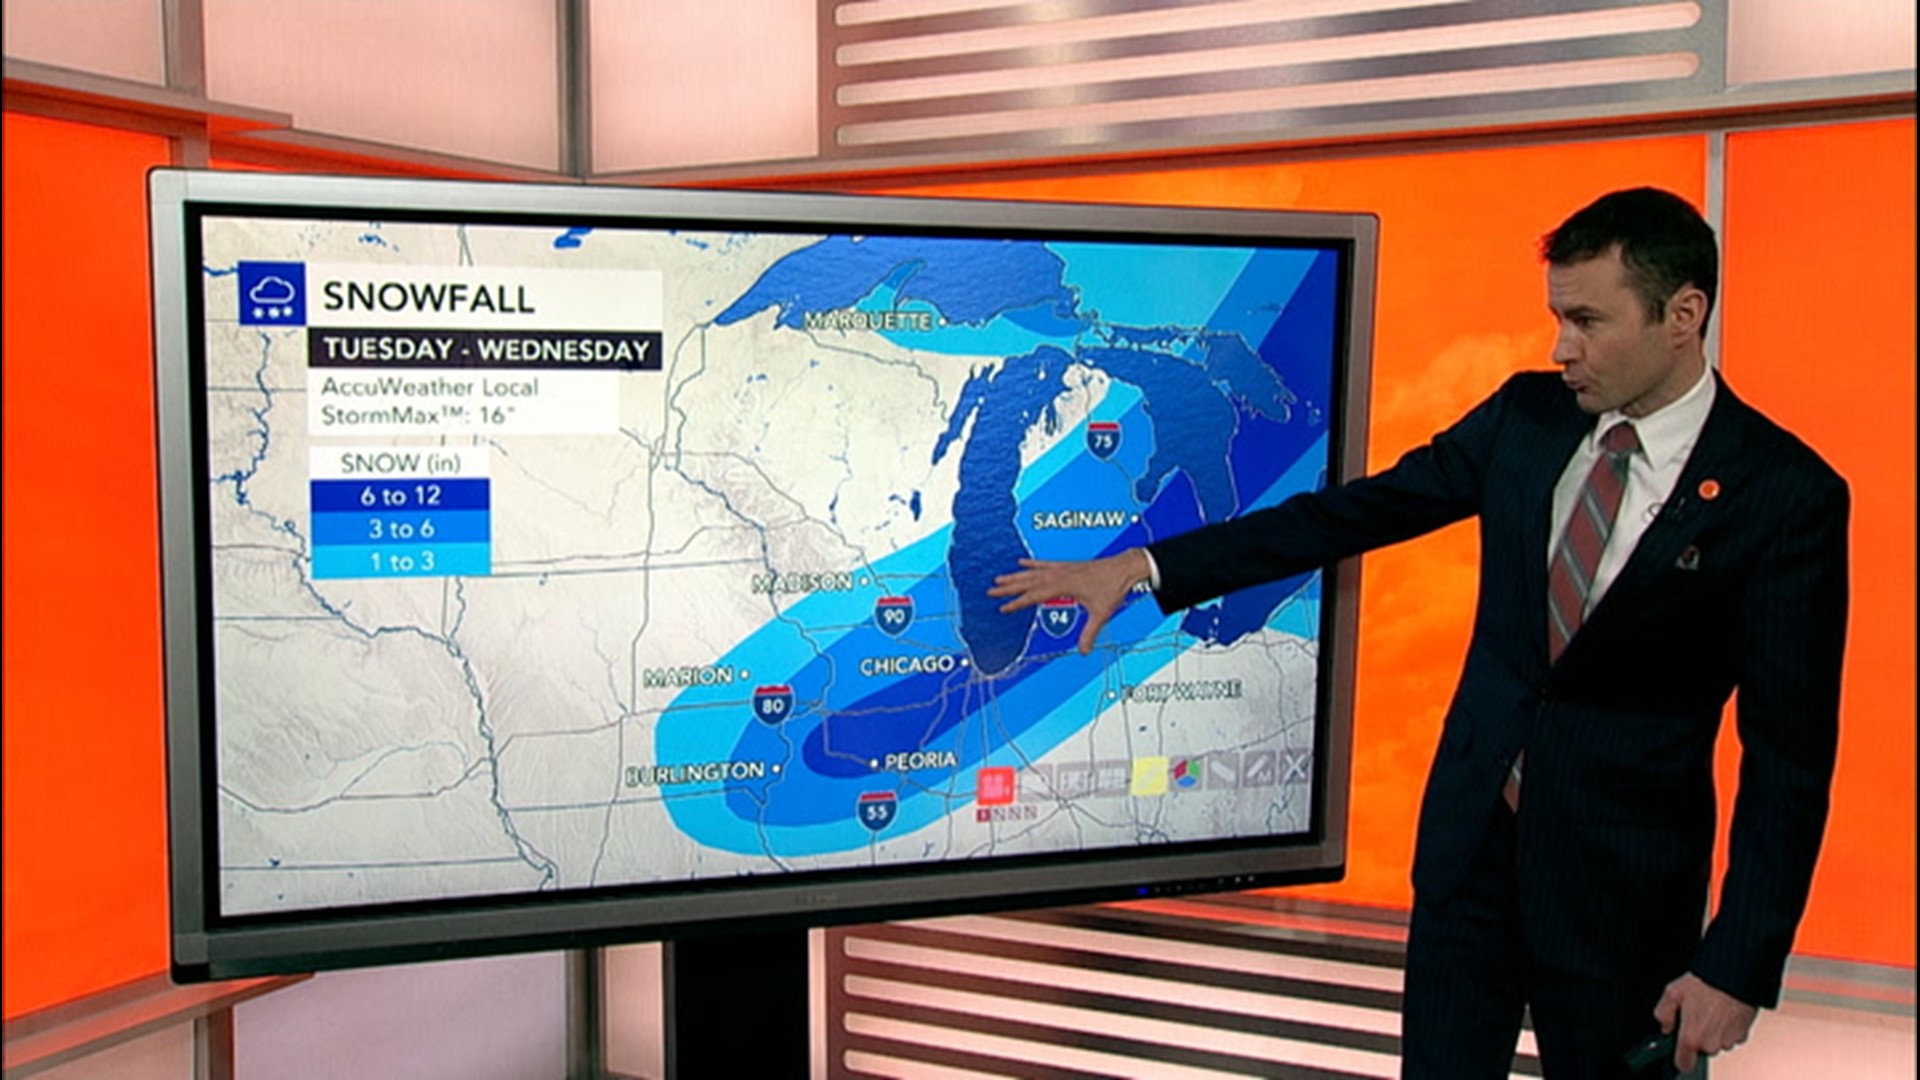 The storm could potentially bring the highest single snowfall accumulation of the season for the Windy City.